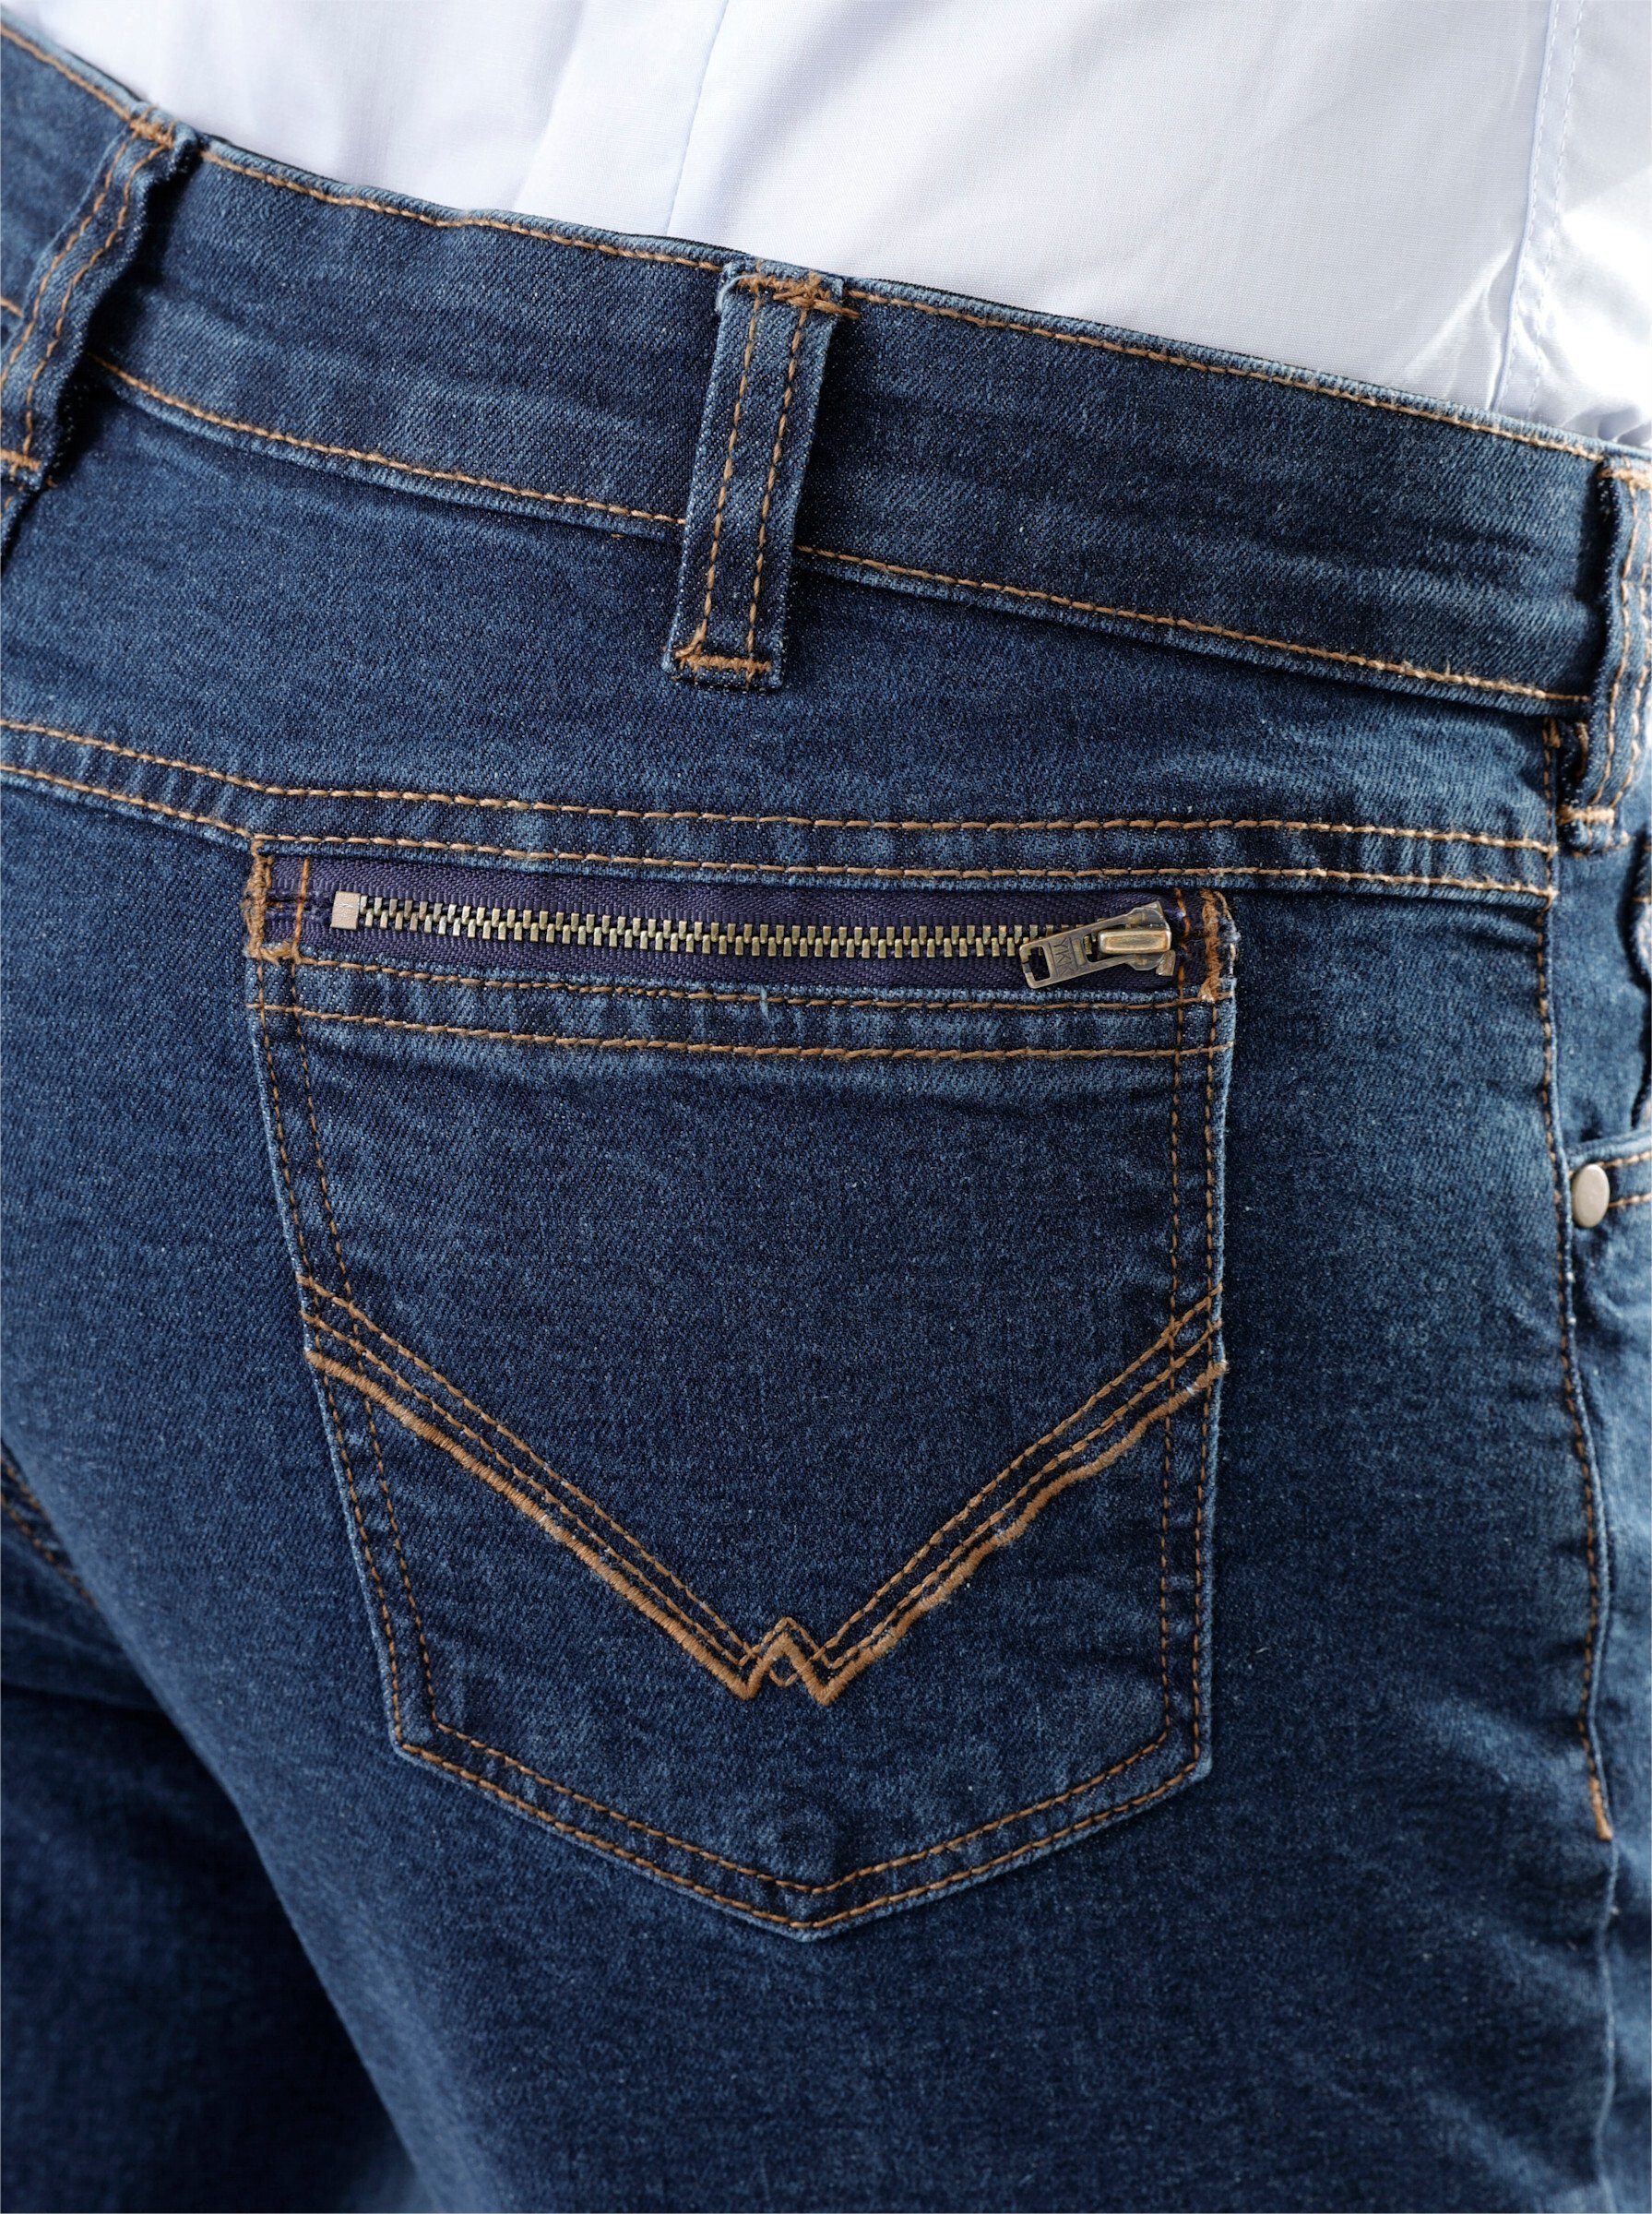 Sieh an! Jeans blue-stone-washed Bequeme